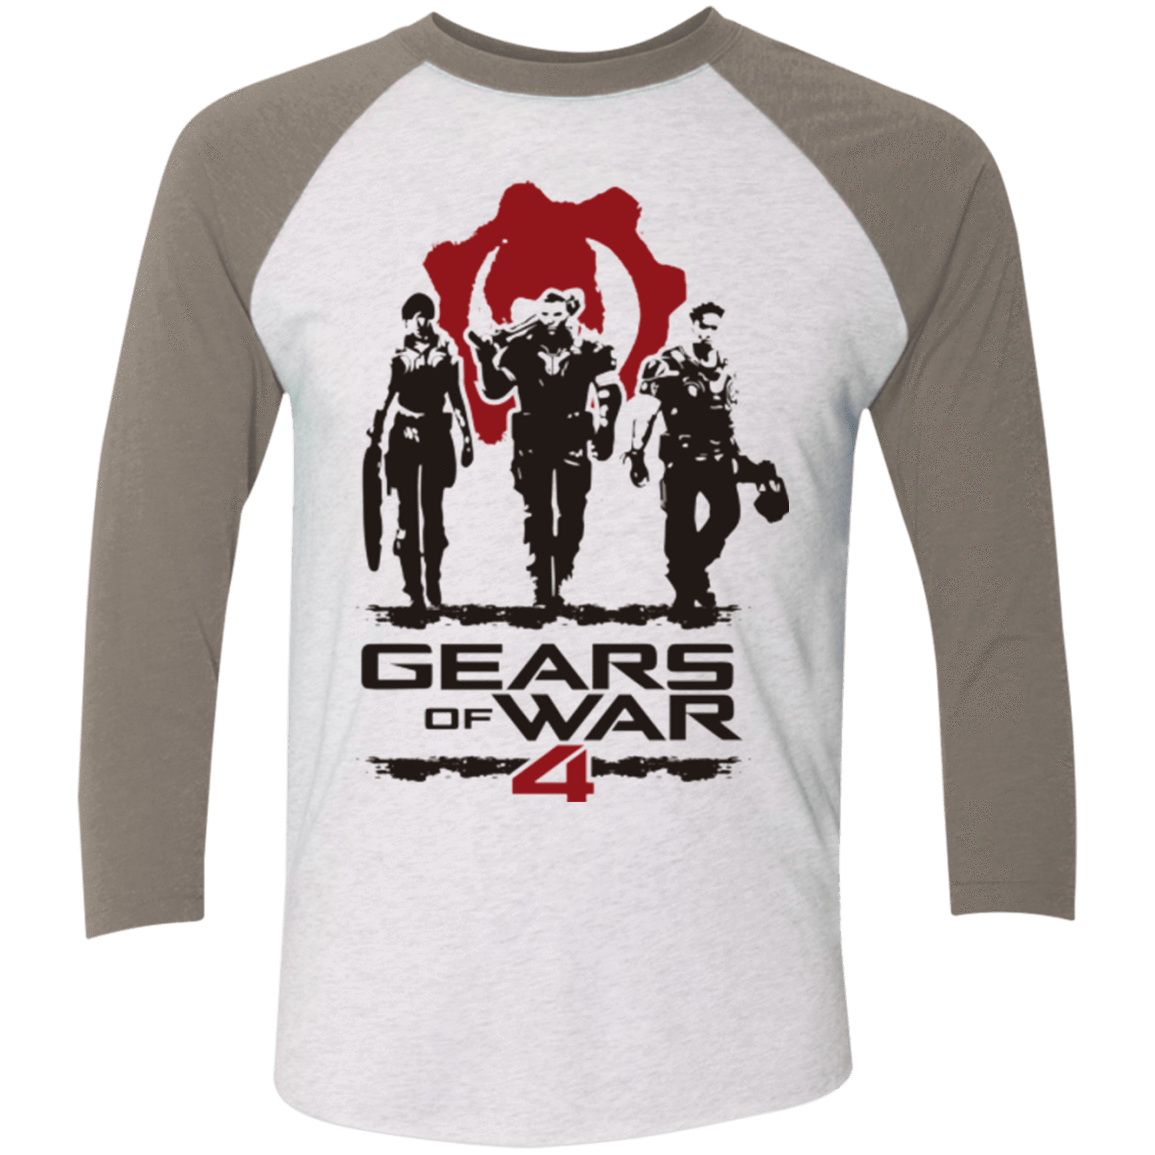 T-Shirts Heather White/Vintage Grey / X-Small Gears Of War 4 White Men's Triblend 3/4 Sleeve